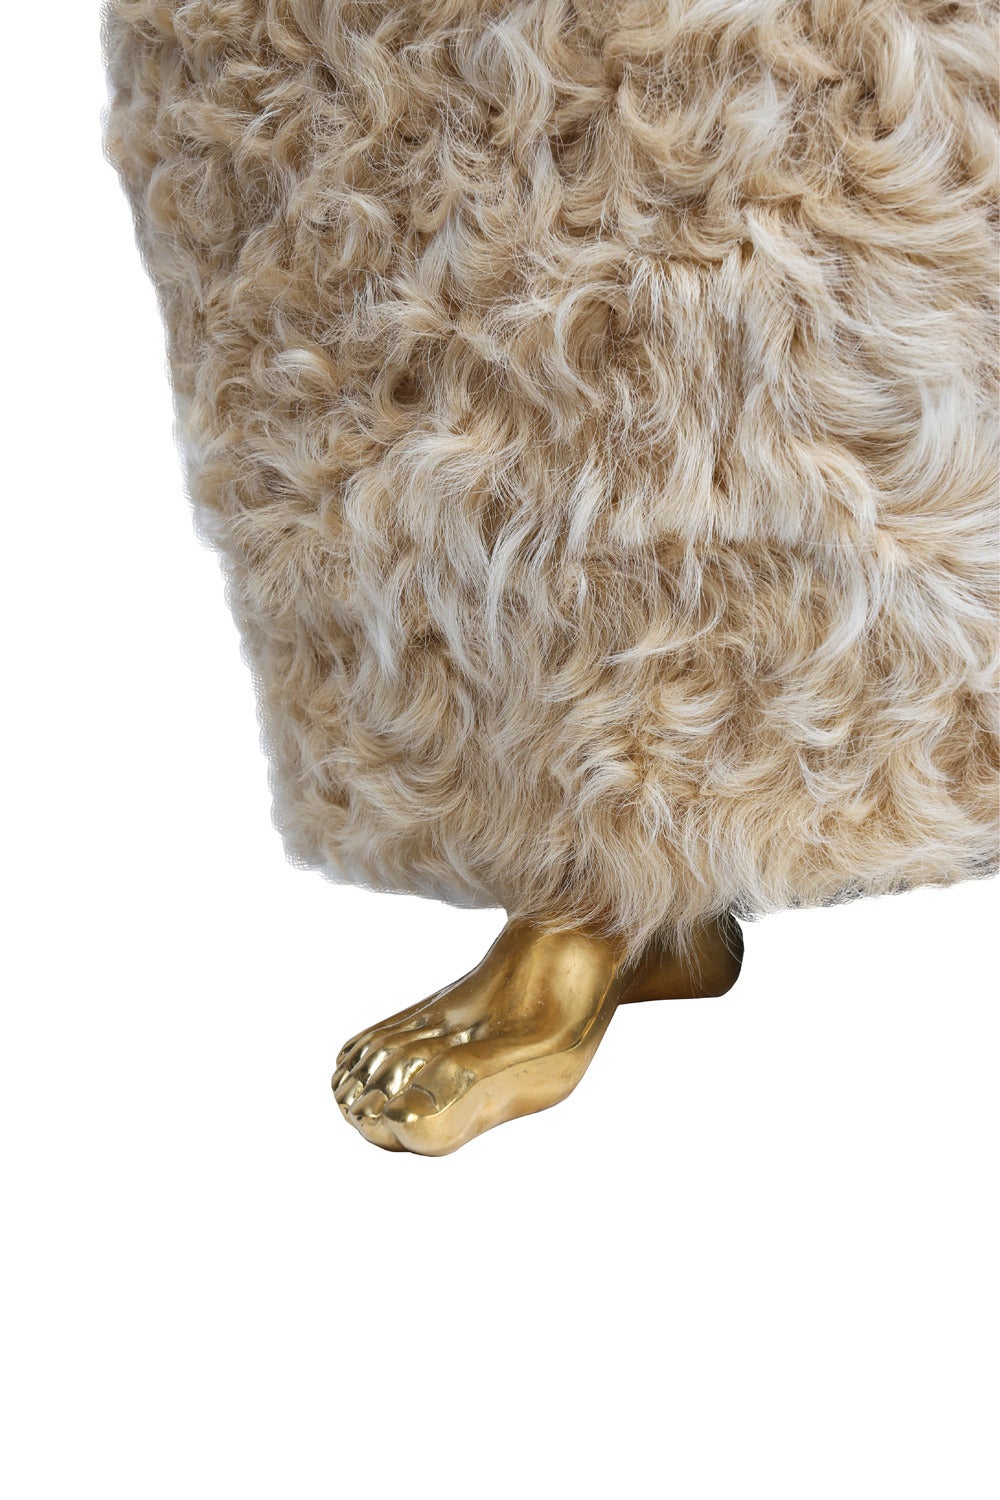 The Foot Stool is handmade from a seat of luxurious shearling mounted atop solid bronze cast feet. Unexpected and eye-catching, it is perfect as an ottoman or petite seating at a vanity or console.